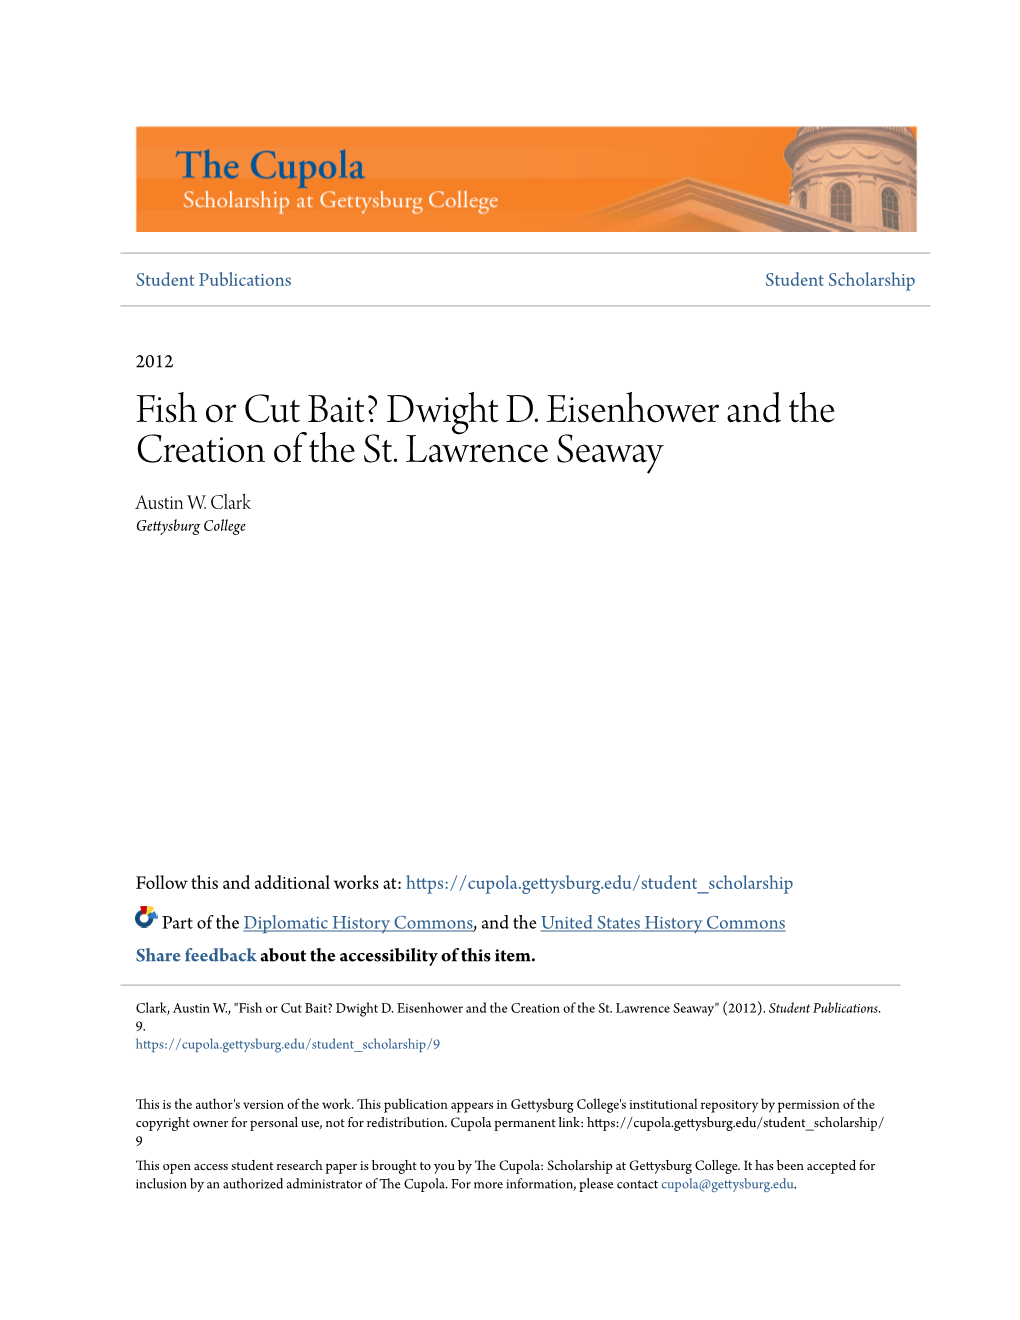 Dwight D. Eisenhower and the Creation of the St. Lawrence Seaway Austin W